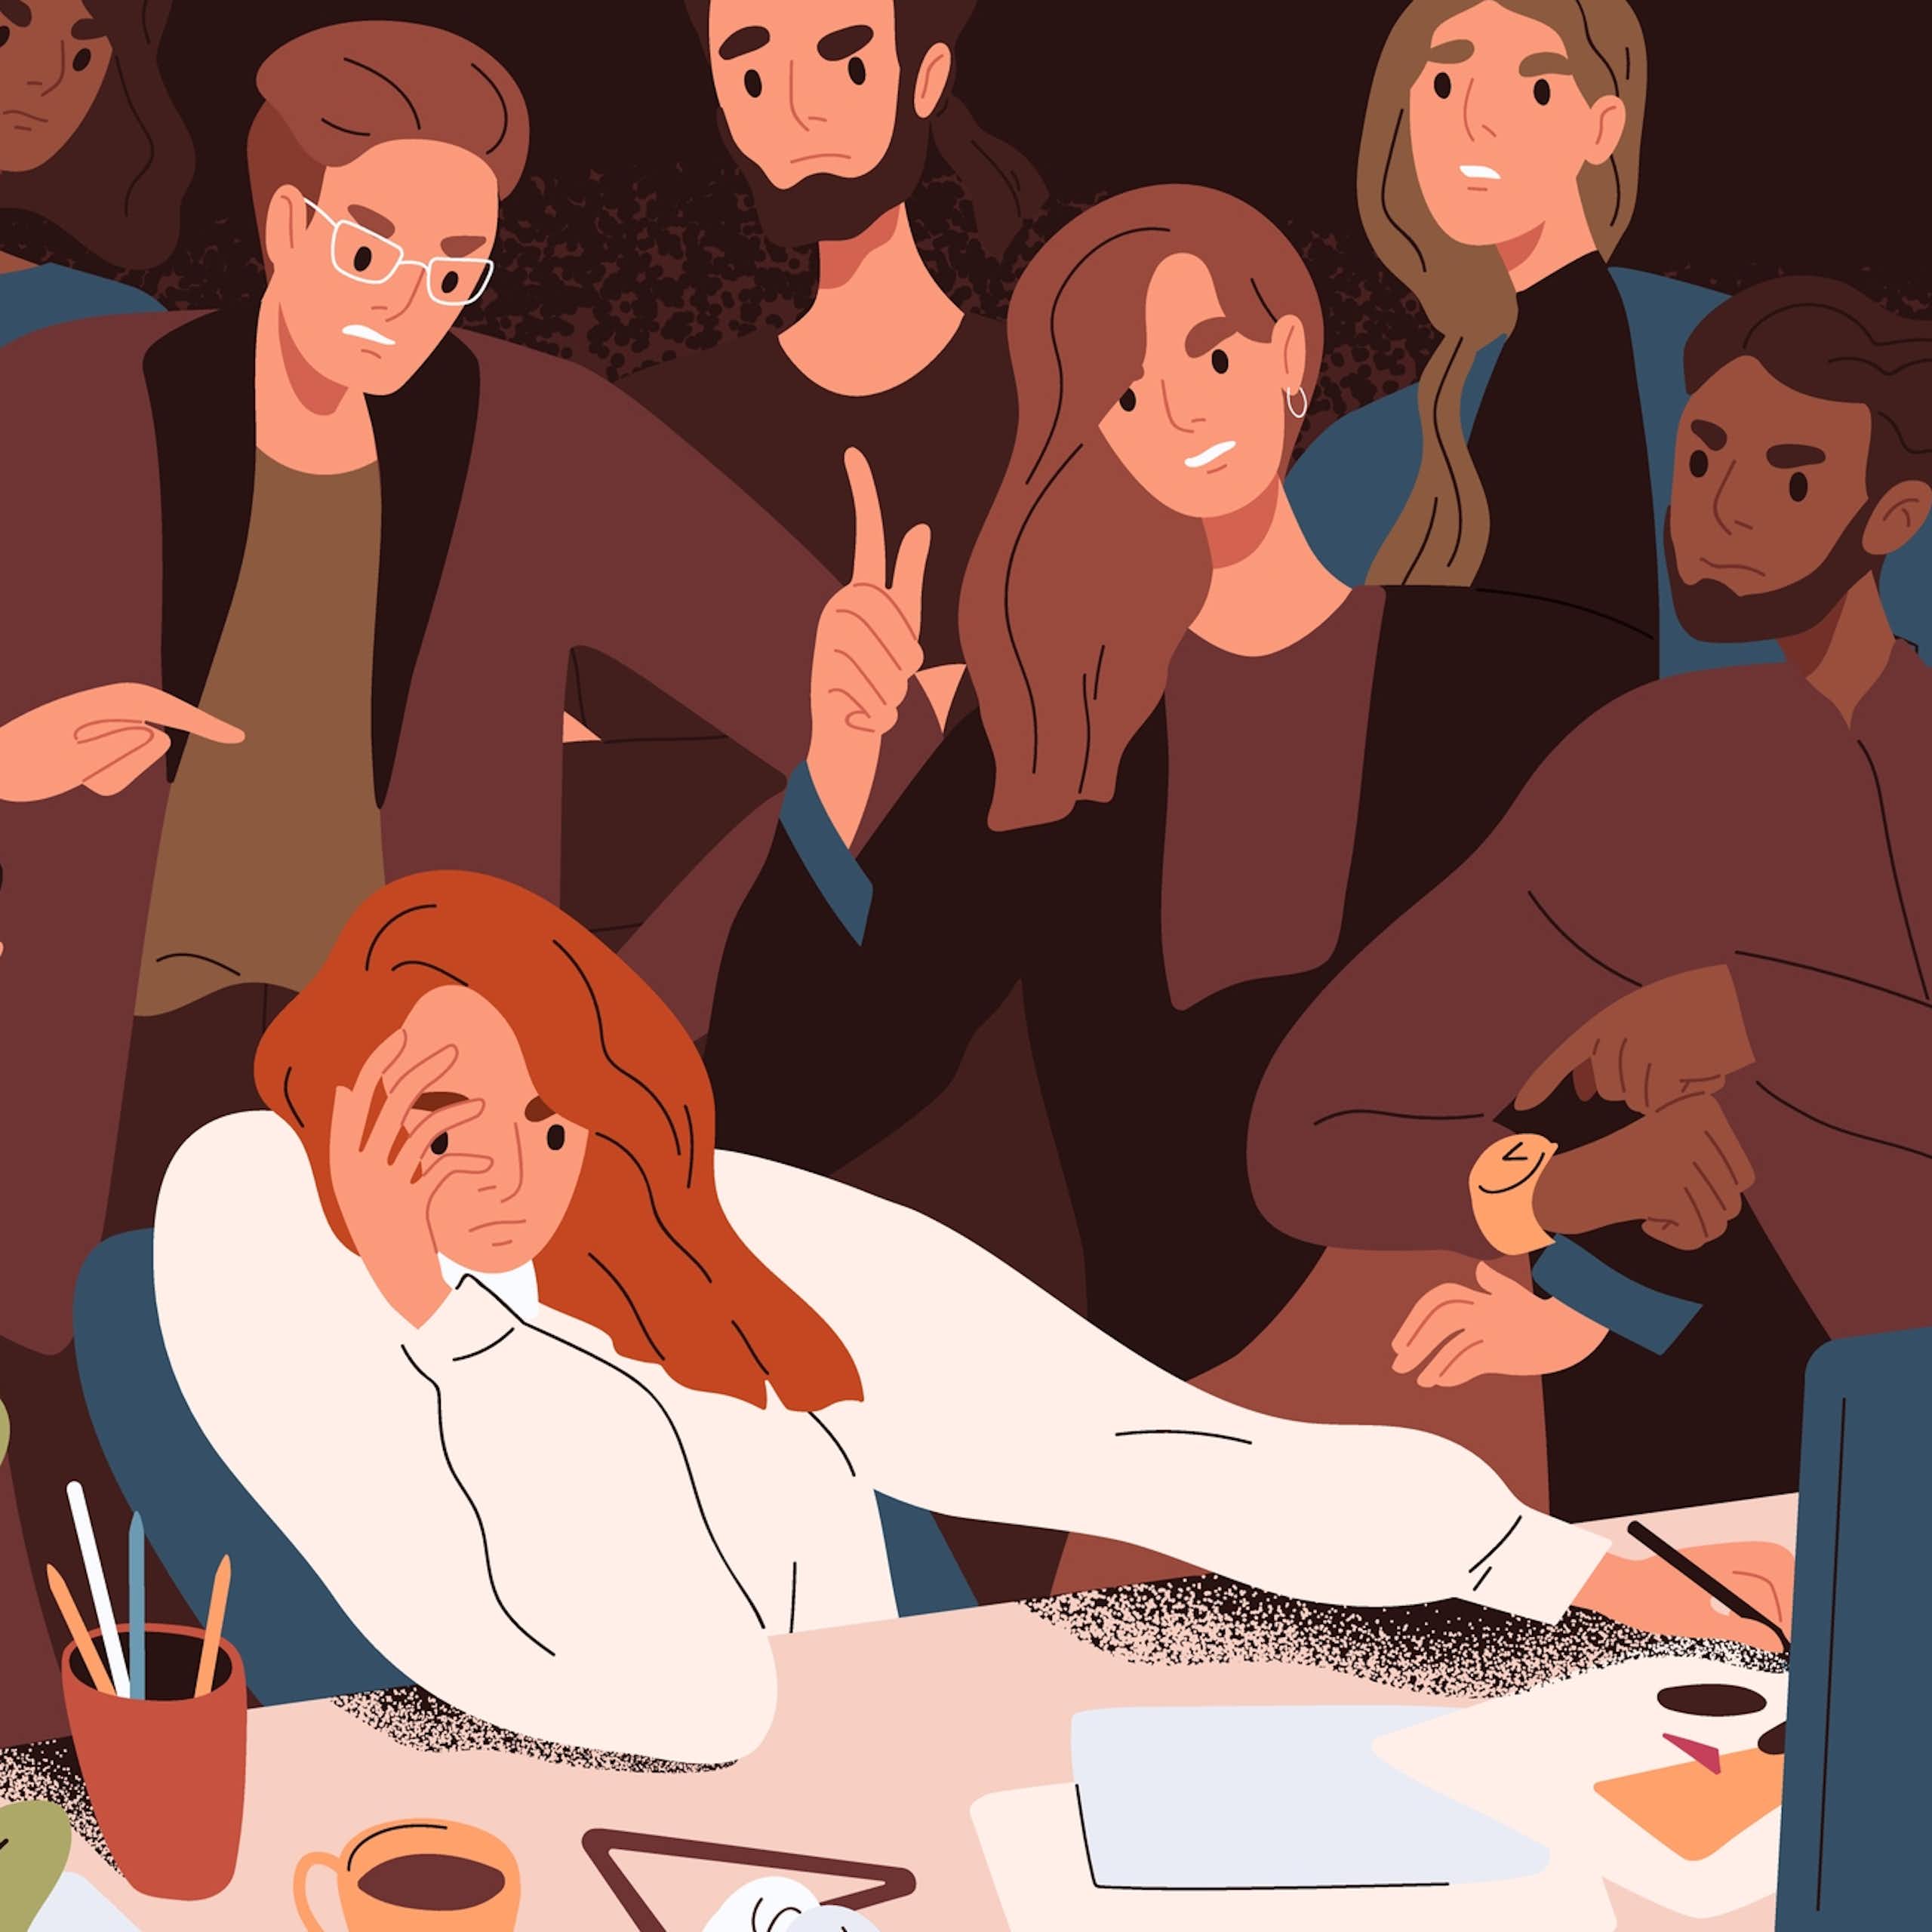 Vector illustration of a worker at her desk looking ashamed, while angry colleagues surround her